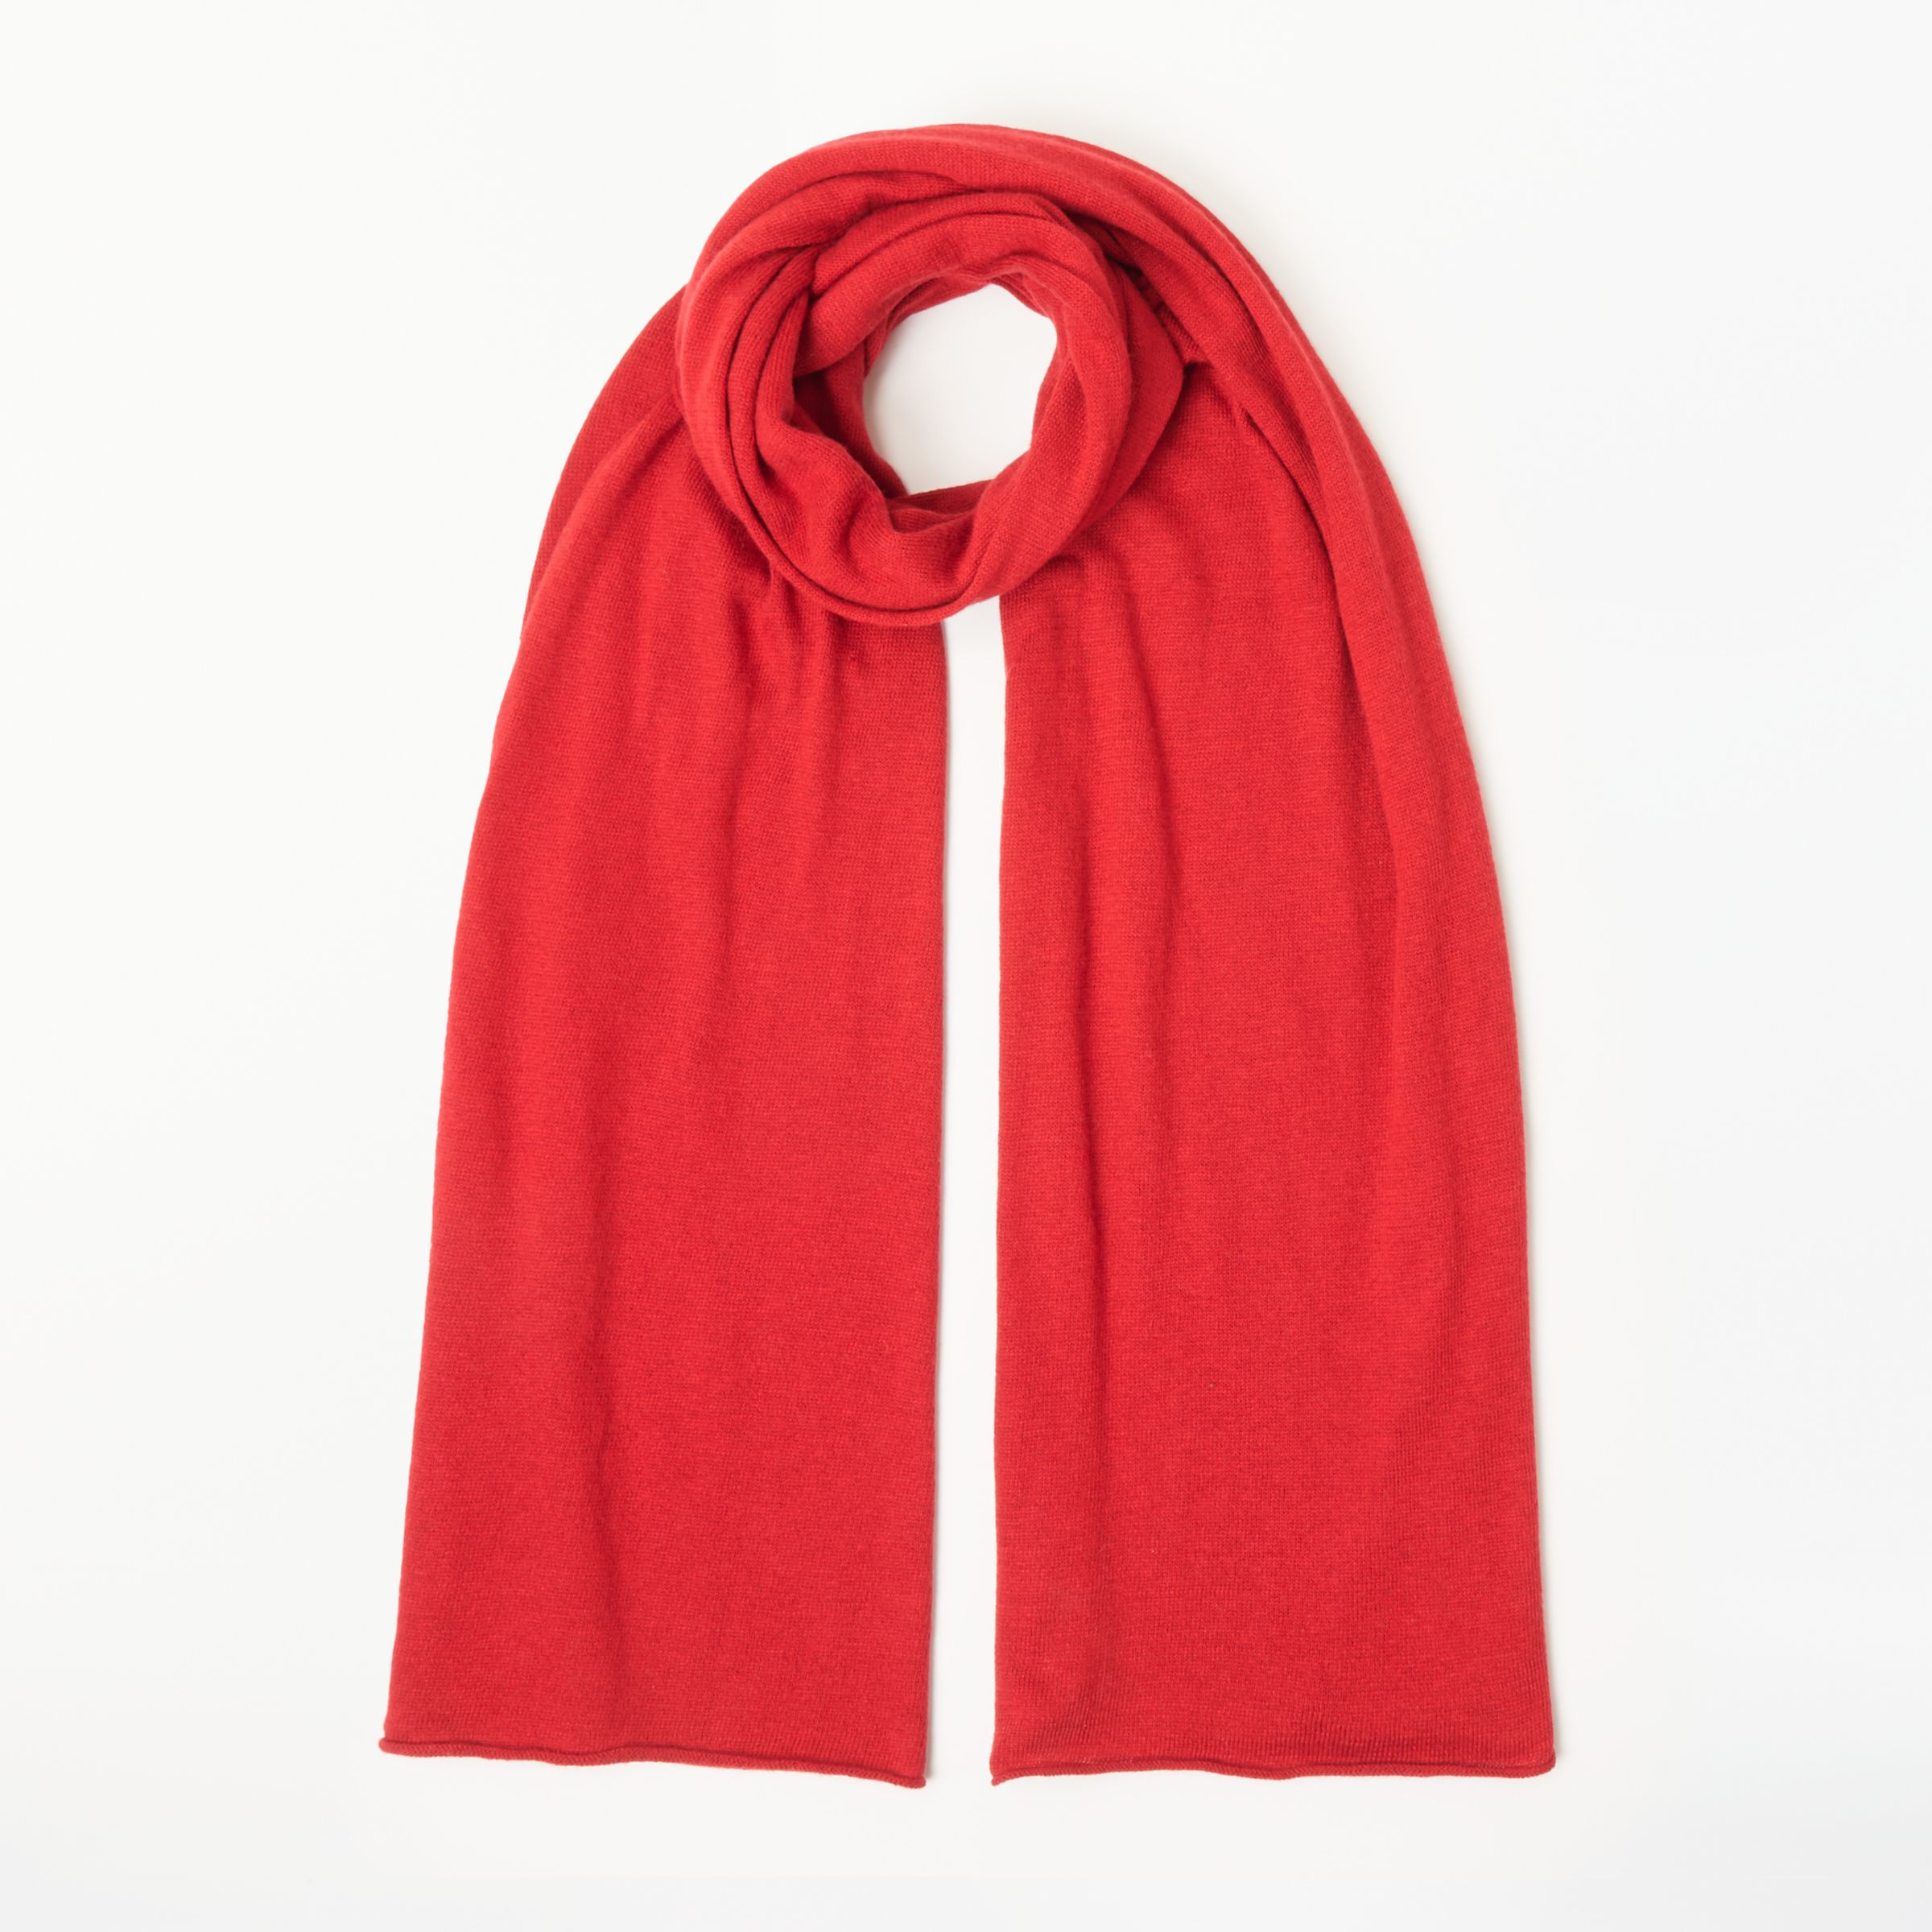 John Lewis & Partners Plain Knitted Scarf